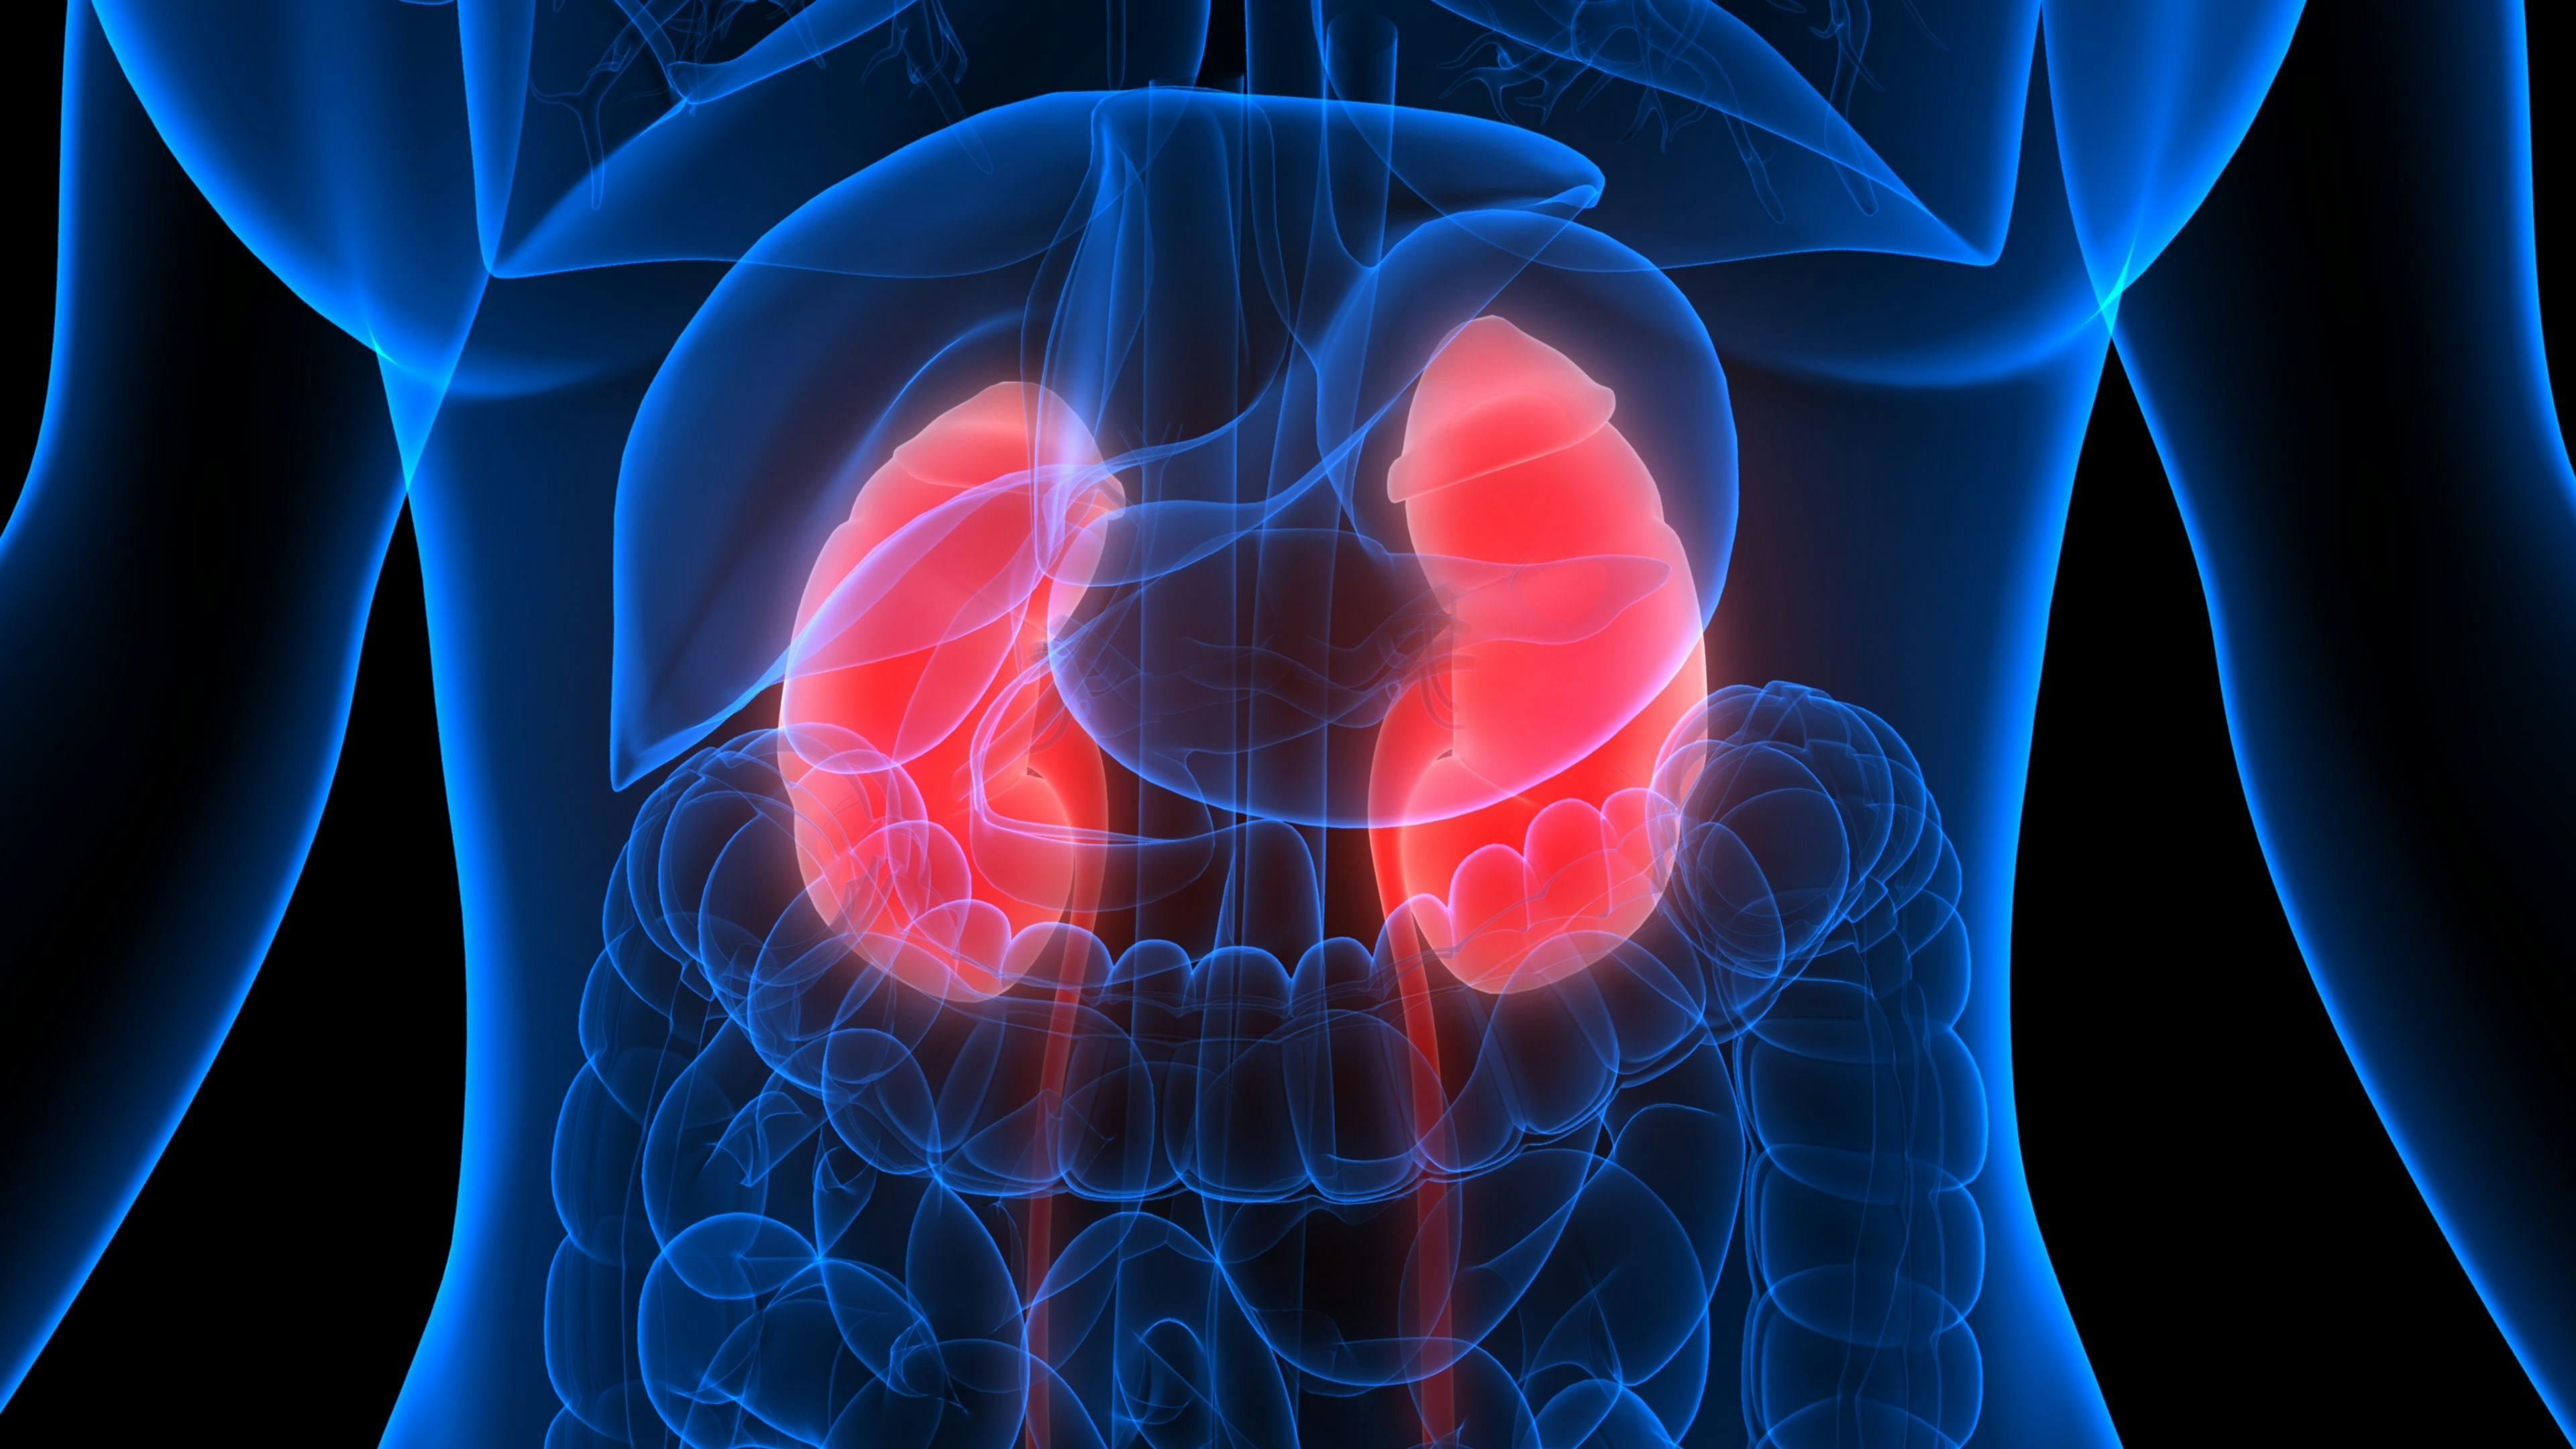 At-Home Test for Kidney Disease Gains FDA Clearance